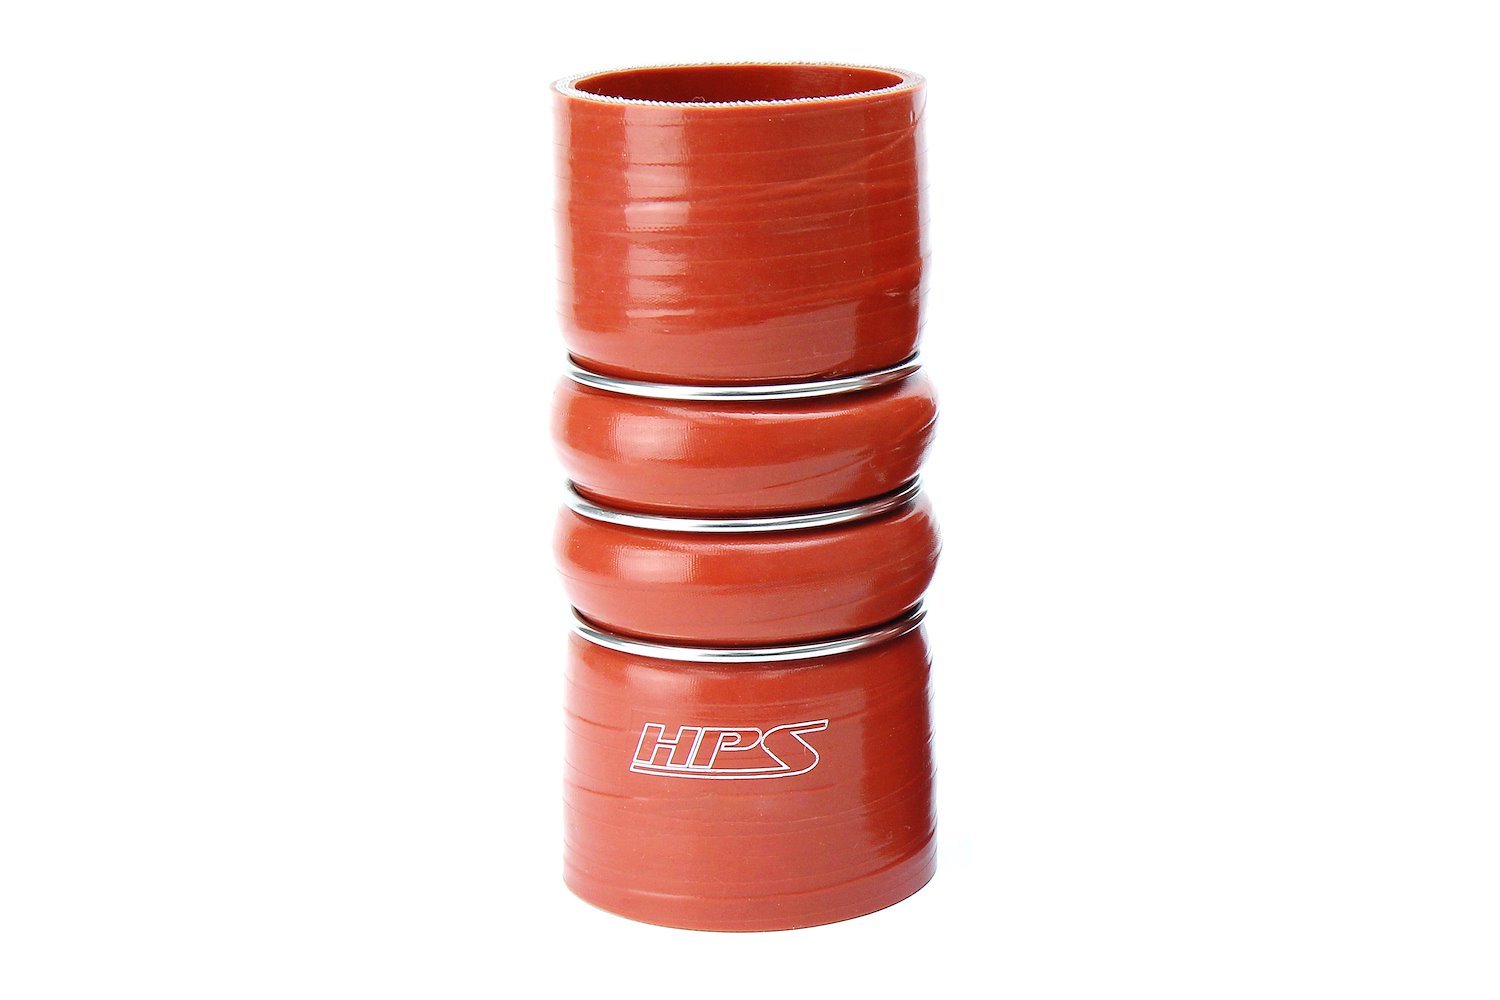 CAC-312-HOT Silicone CAC Hose, Silicone CAC Hump Hose Hot, High-Temp 4-Ply Aramid Reinforced, 3-1/8 in. ID, 6 in. Long